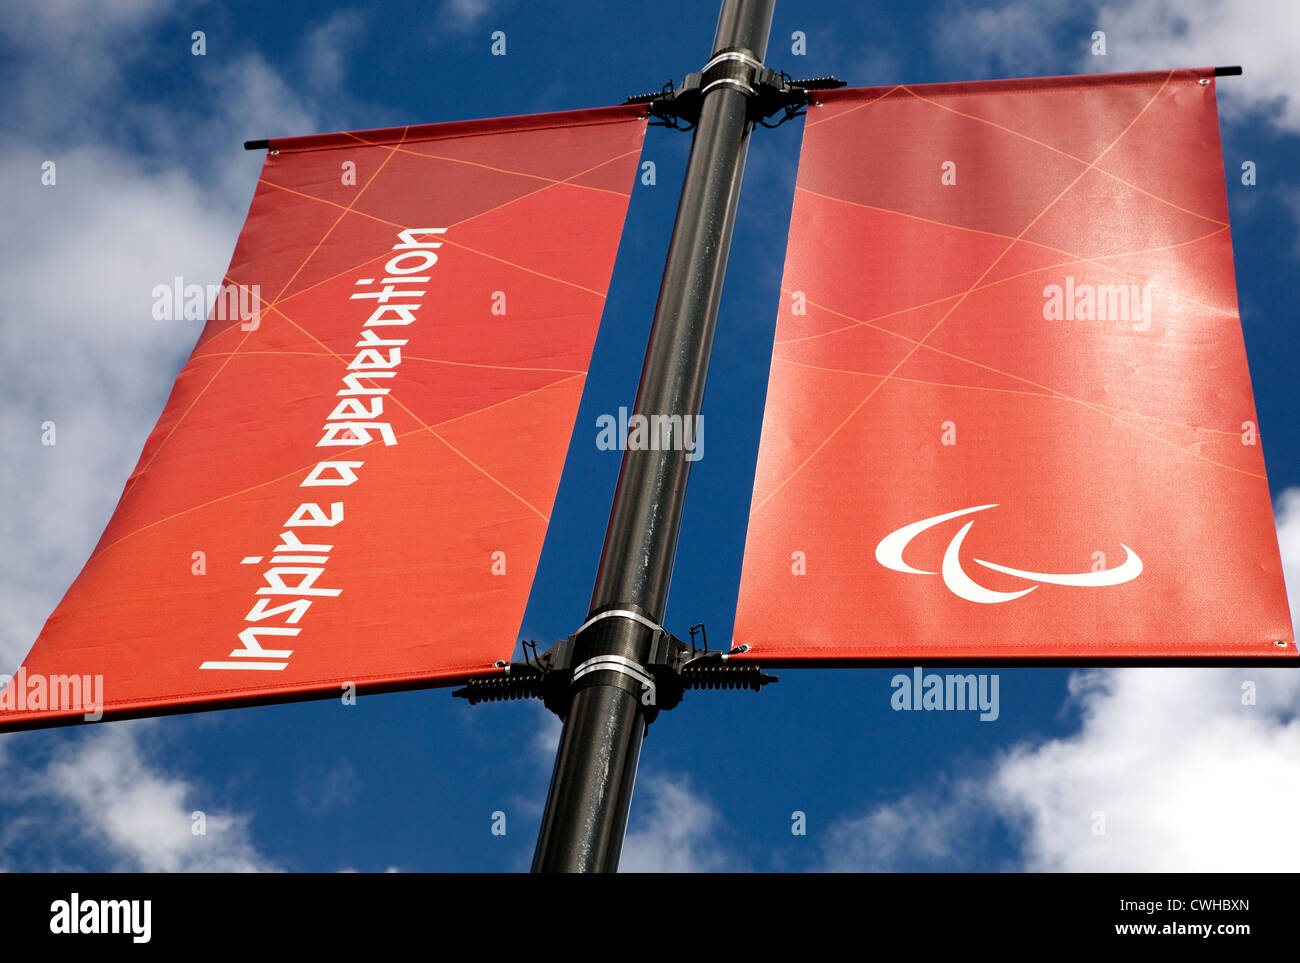 Agitos symbol for Paralympic Games & slogan on London street banner Stock Photo